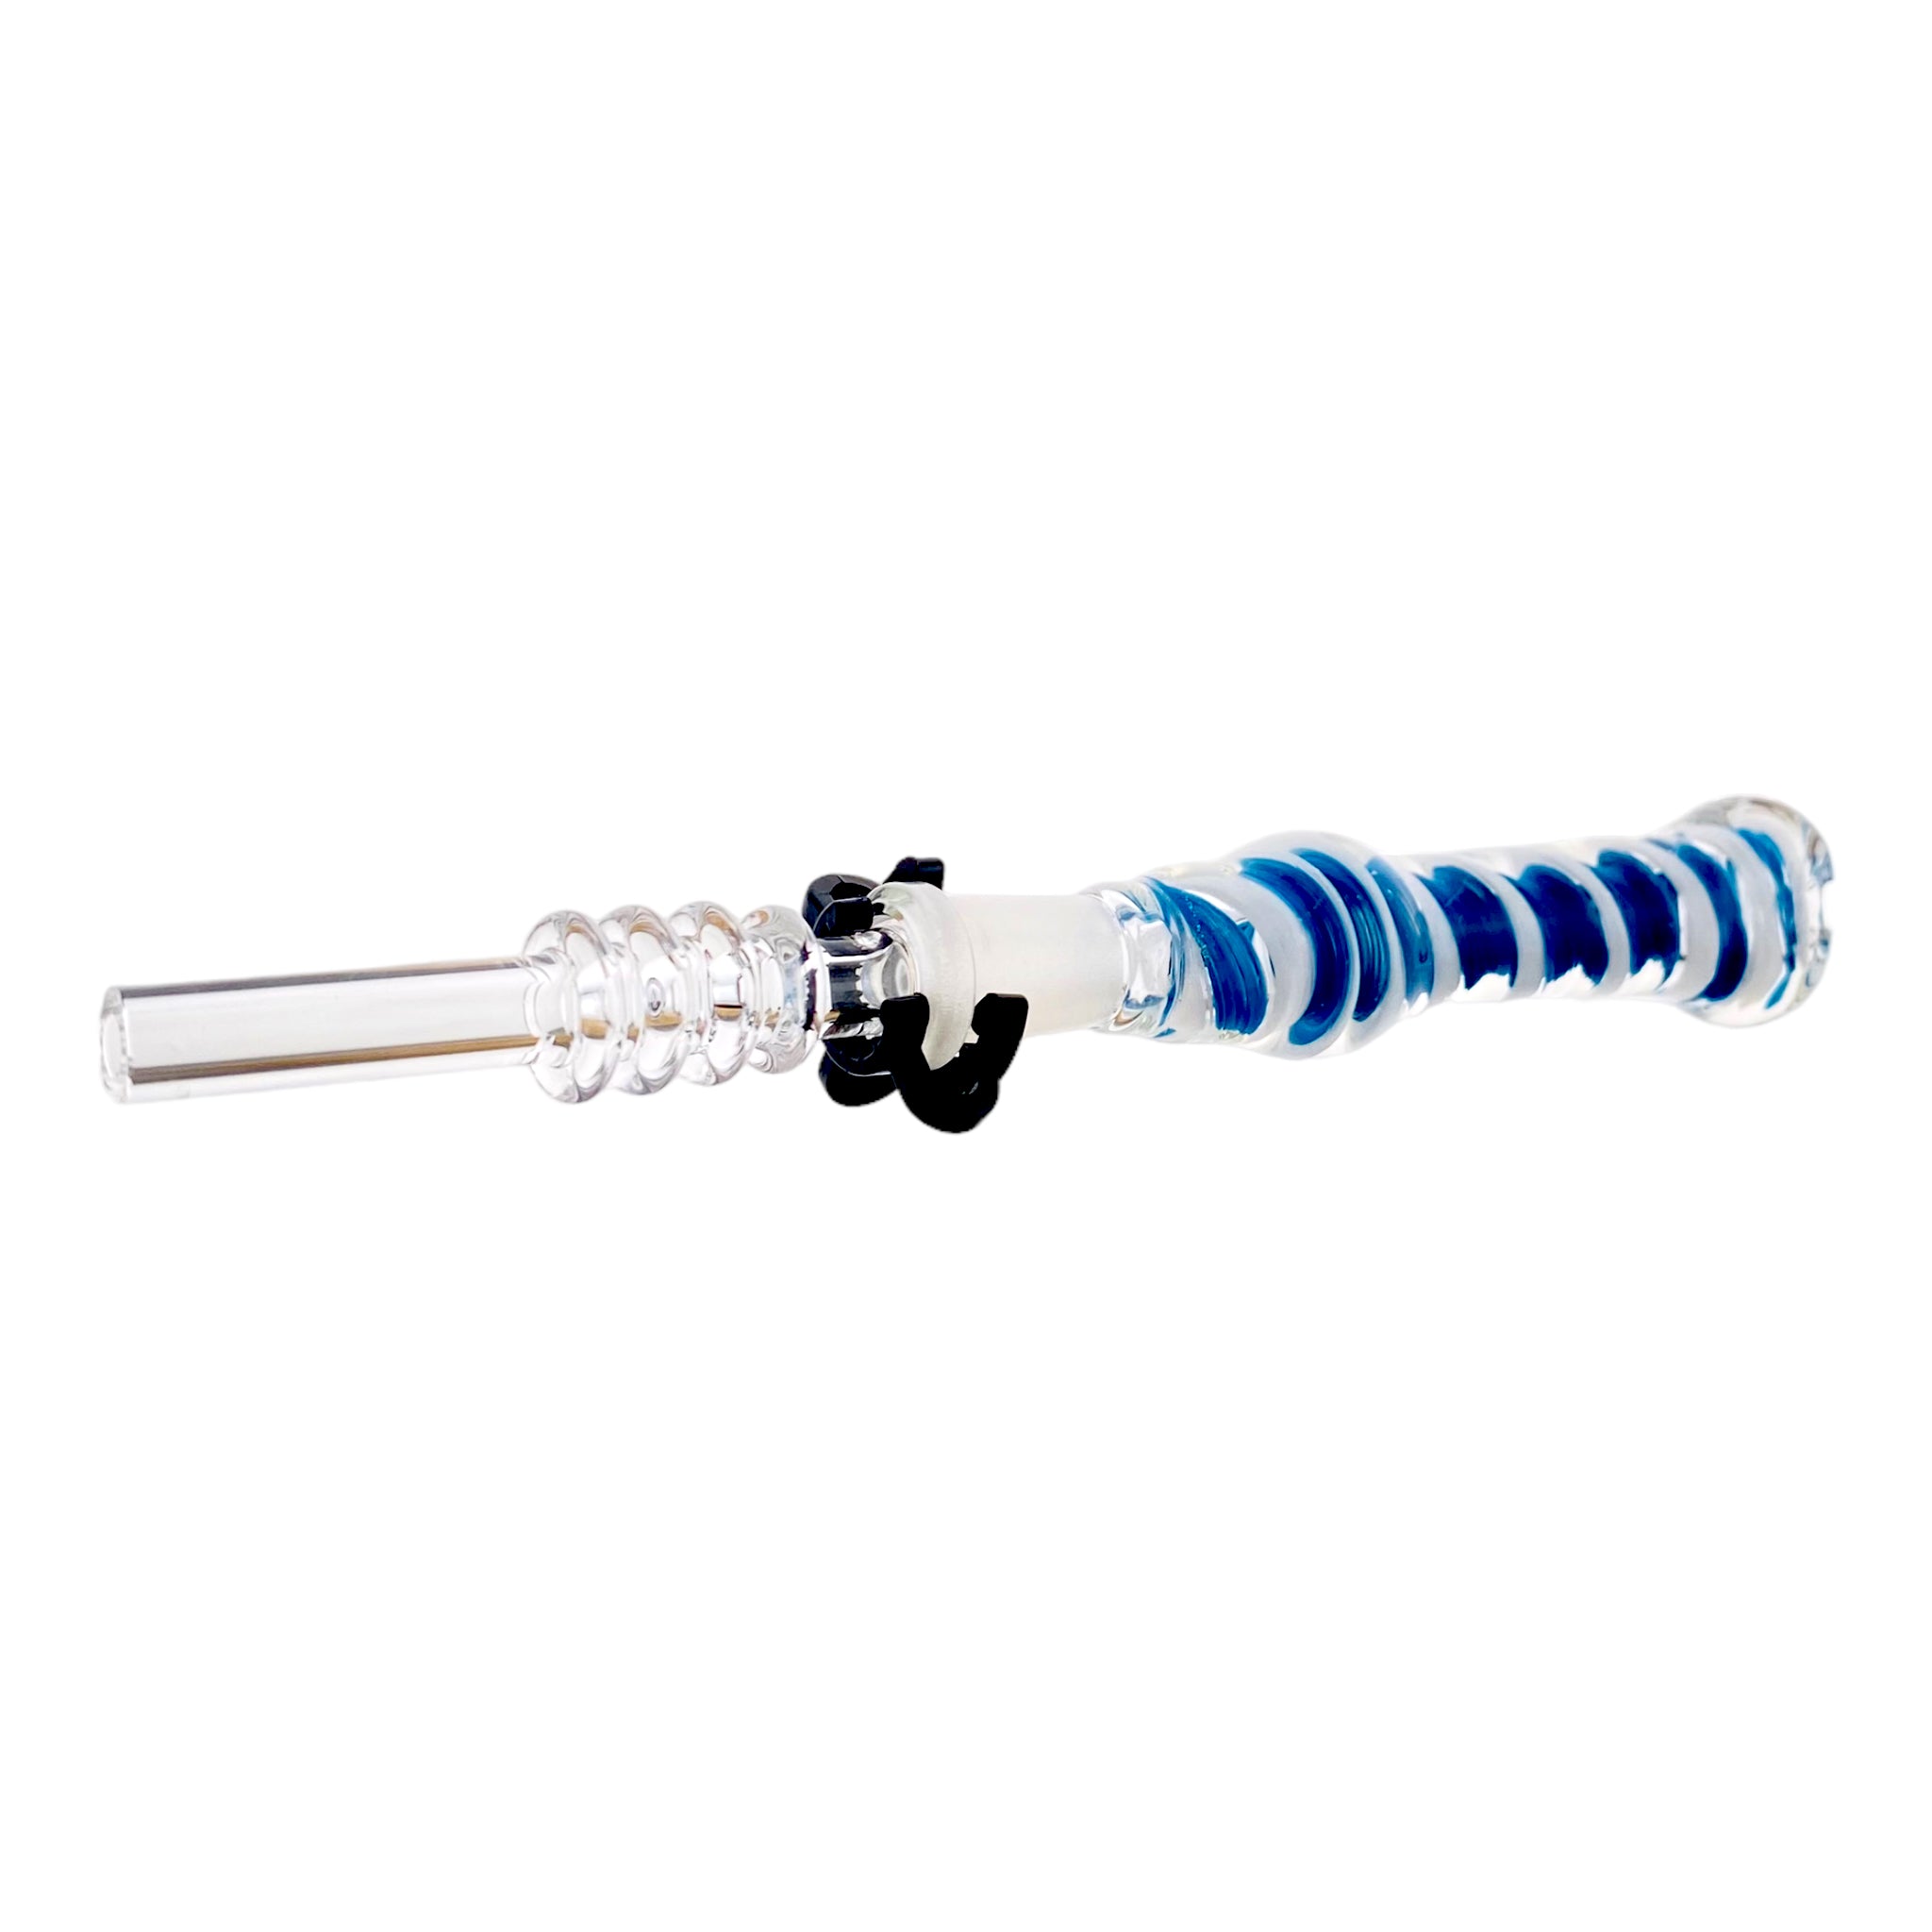 10mm Nectar Collector - Blue And White Inside Out With 10mm Quartz Tip